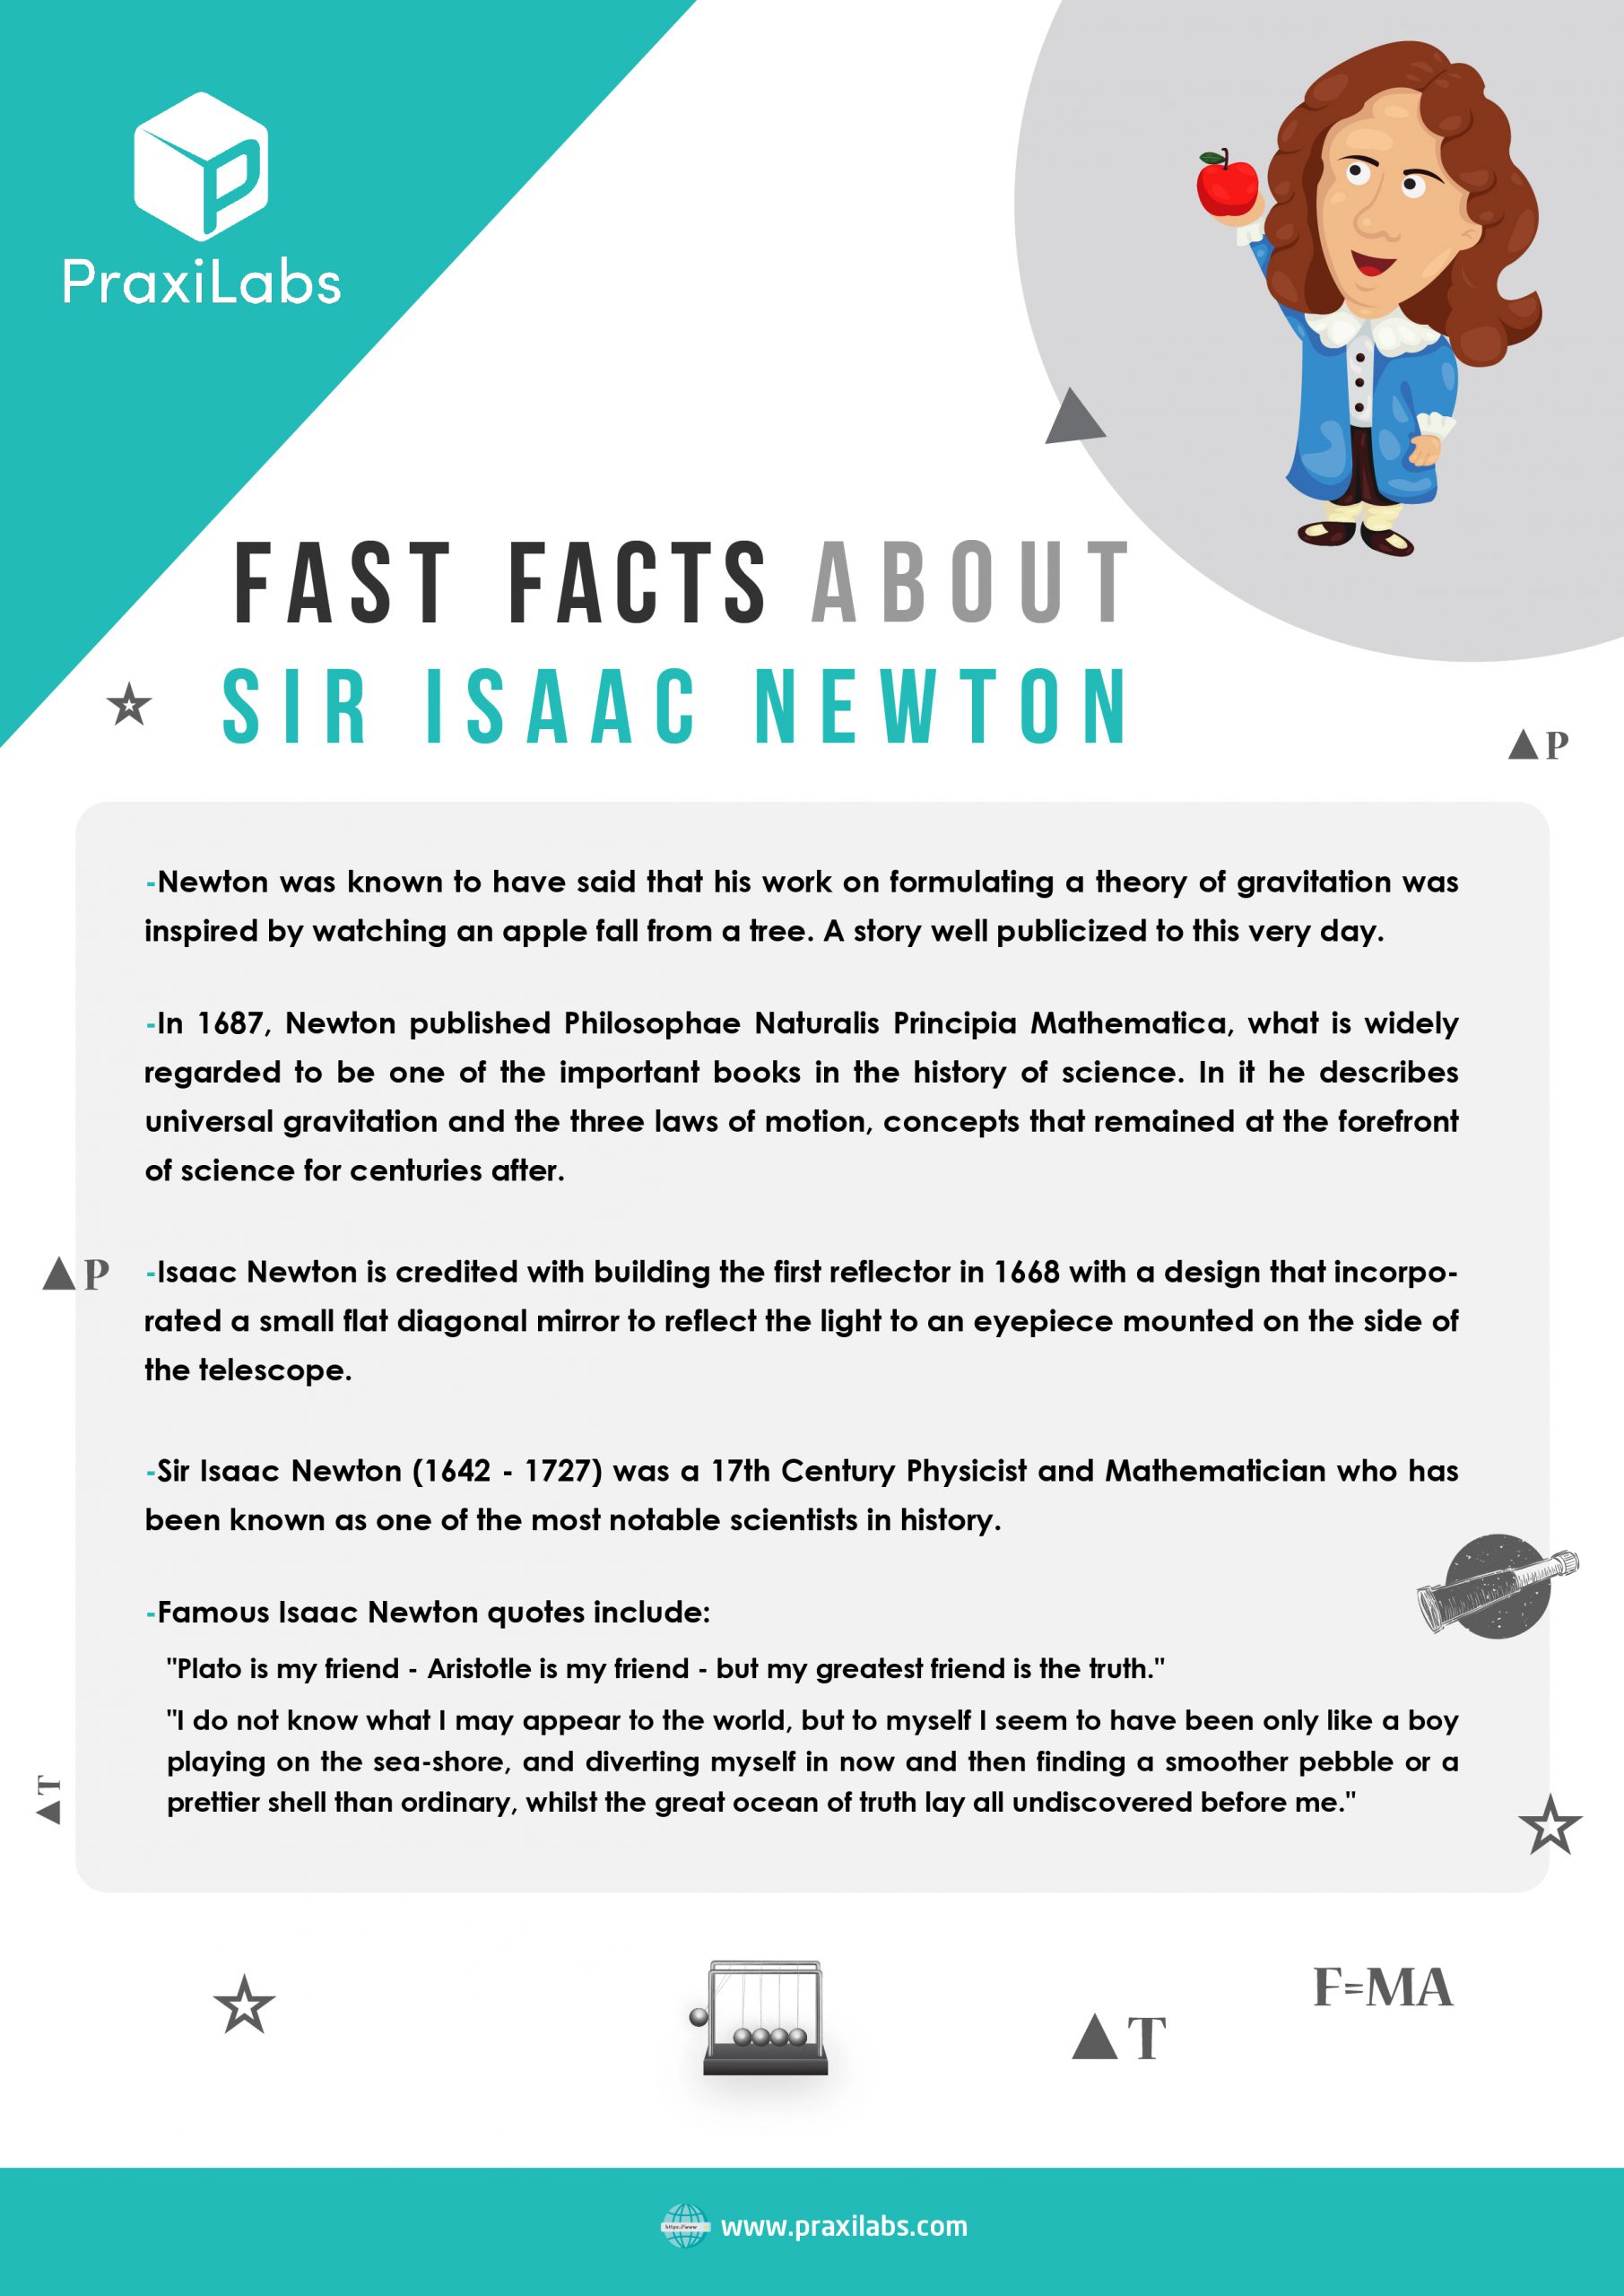 quick facts about Isaac Newton